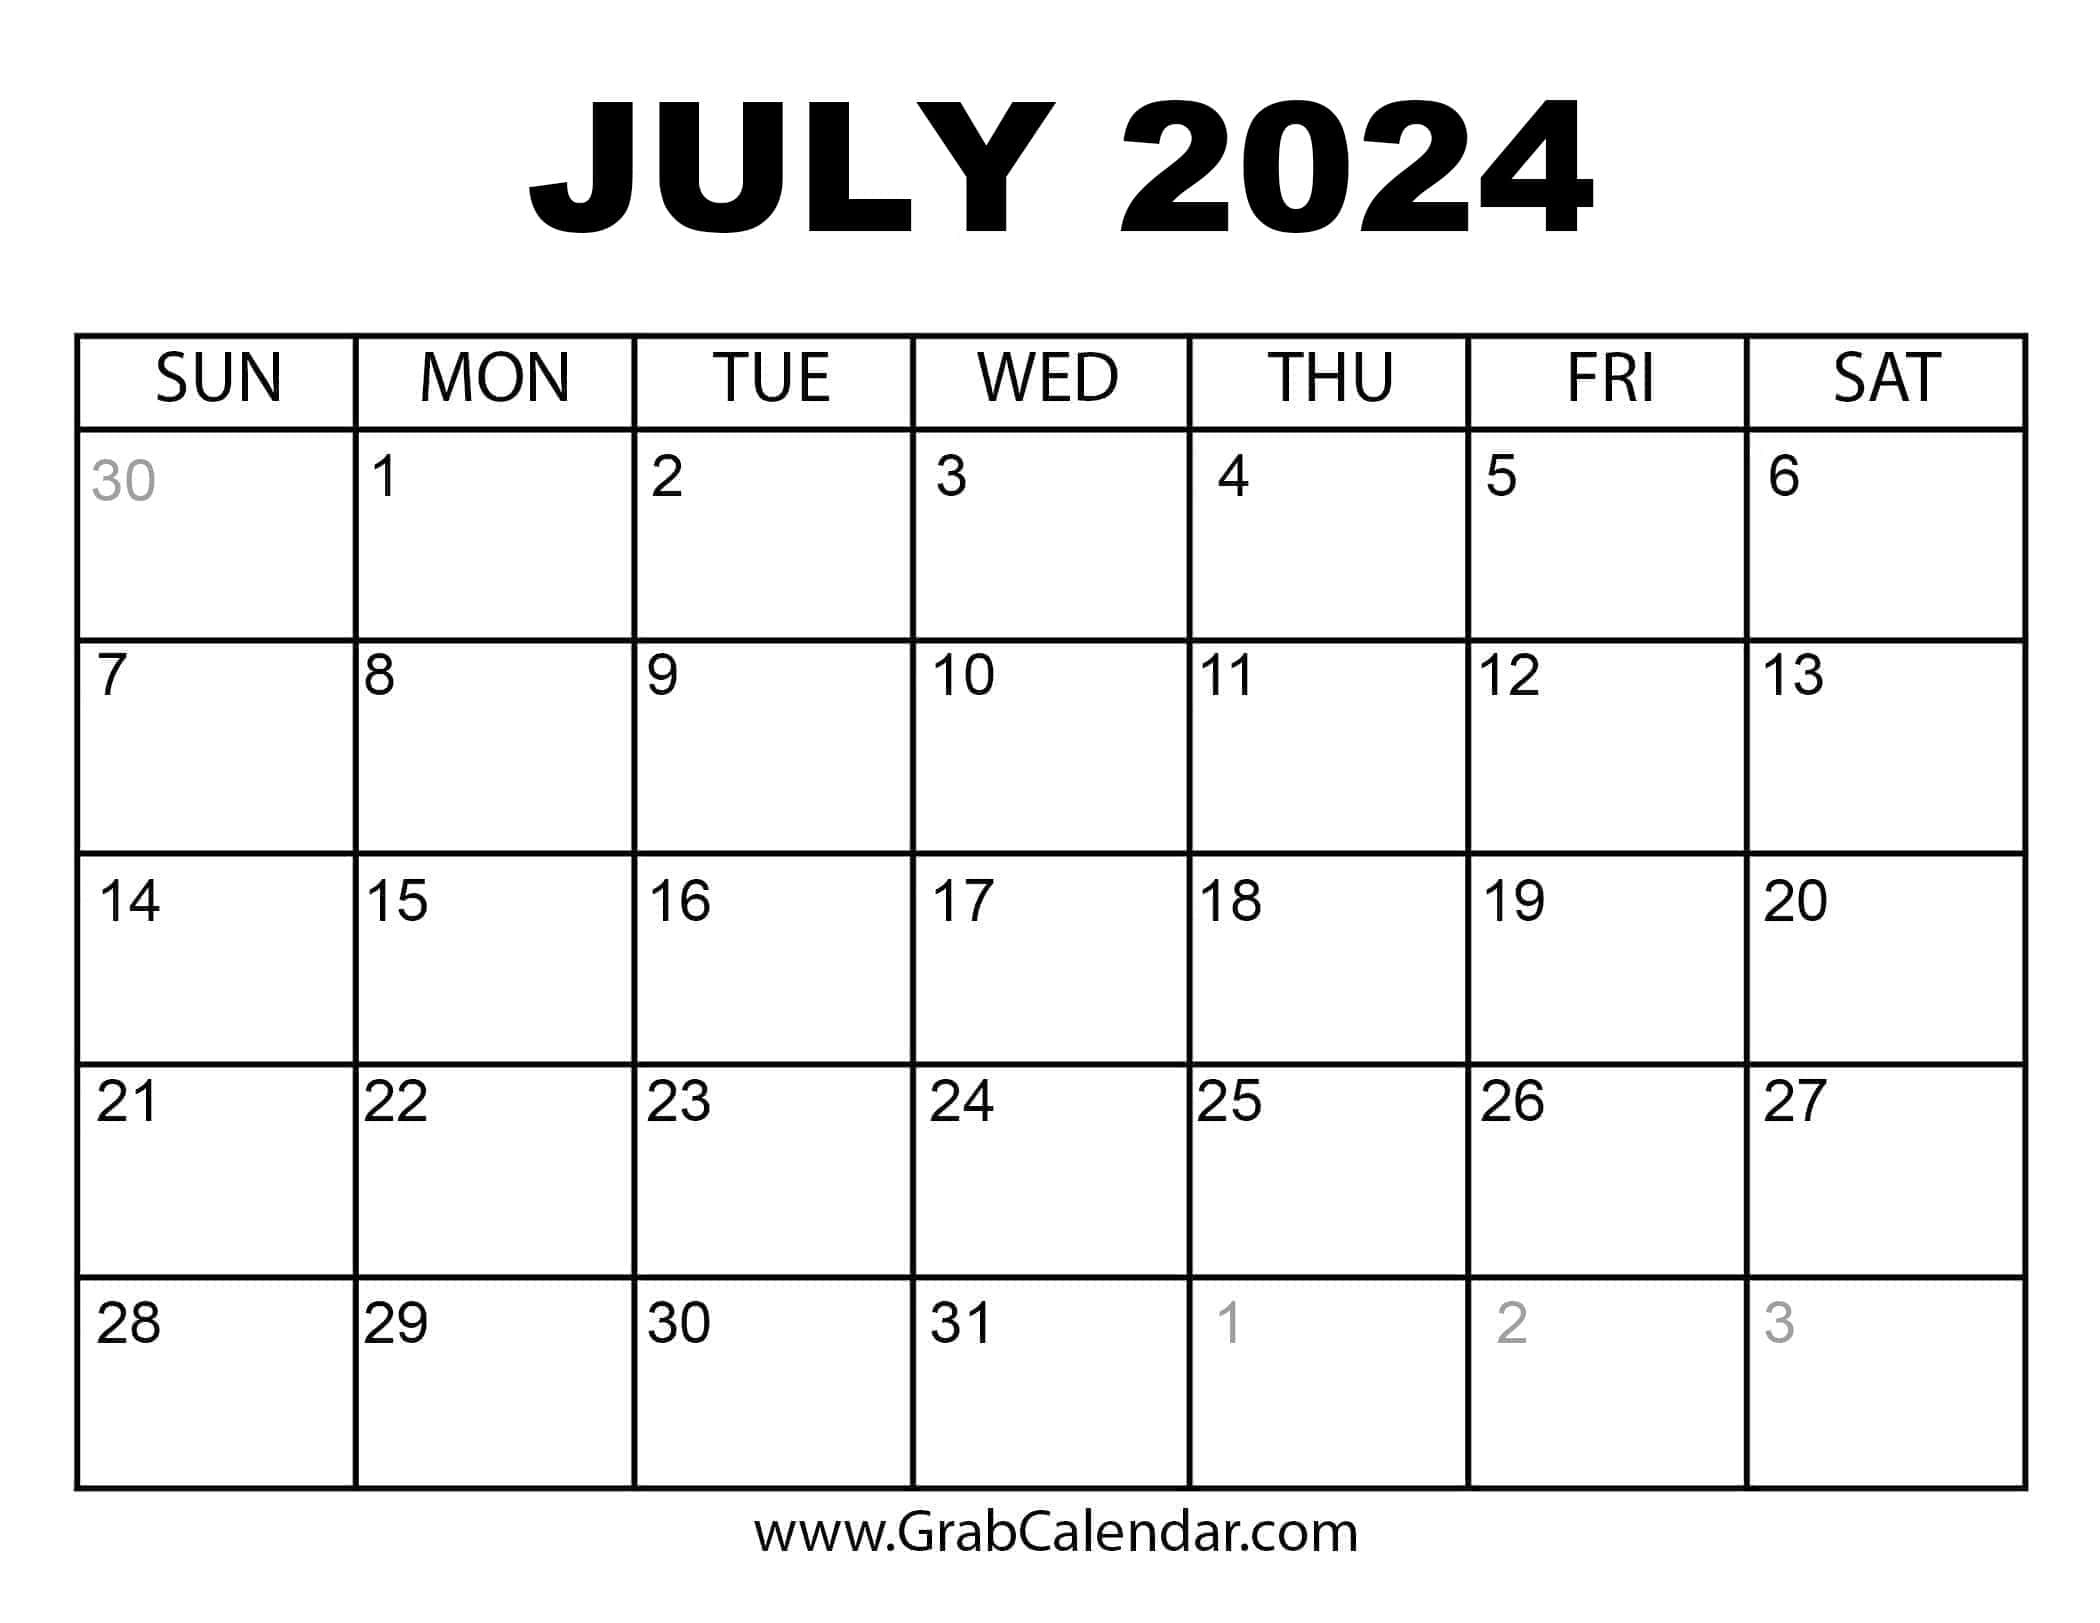 Printable July 2024 Calendar pertaining to Calendar of Events July 2024